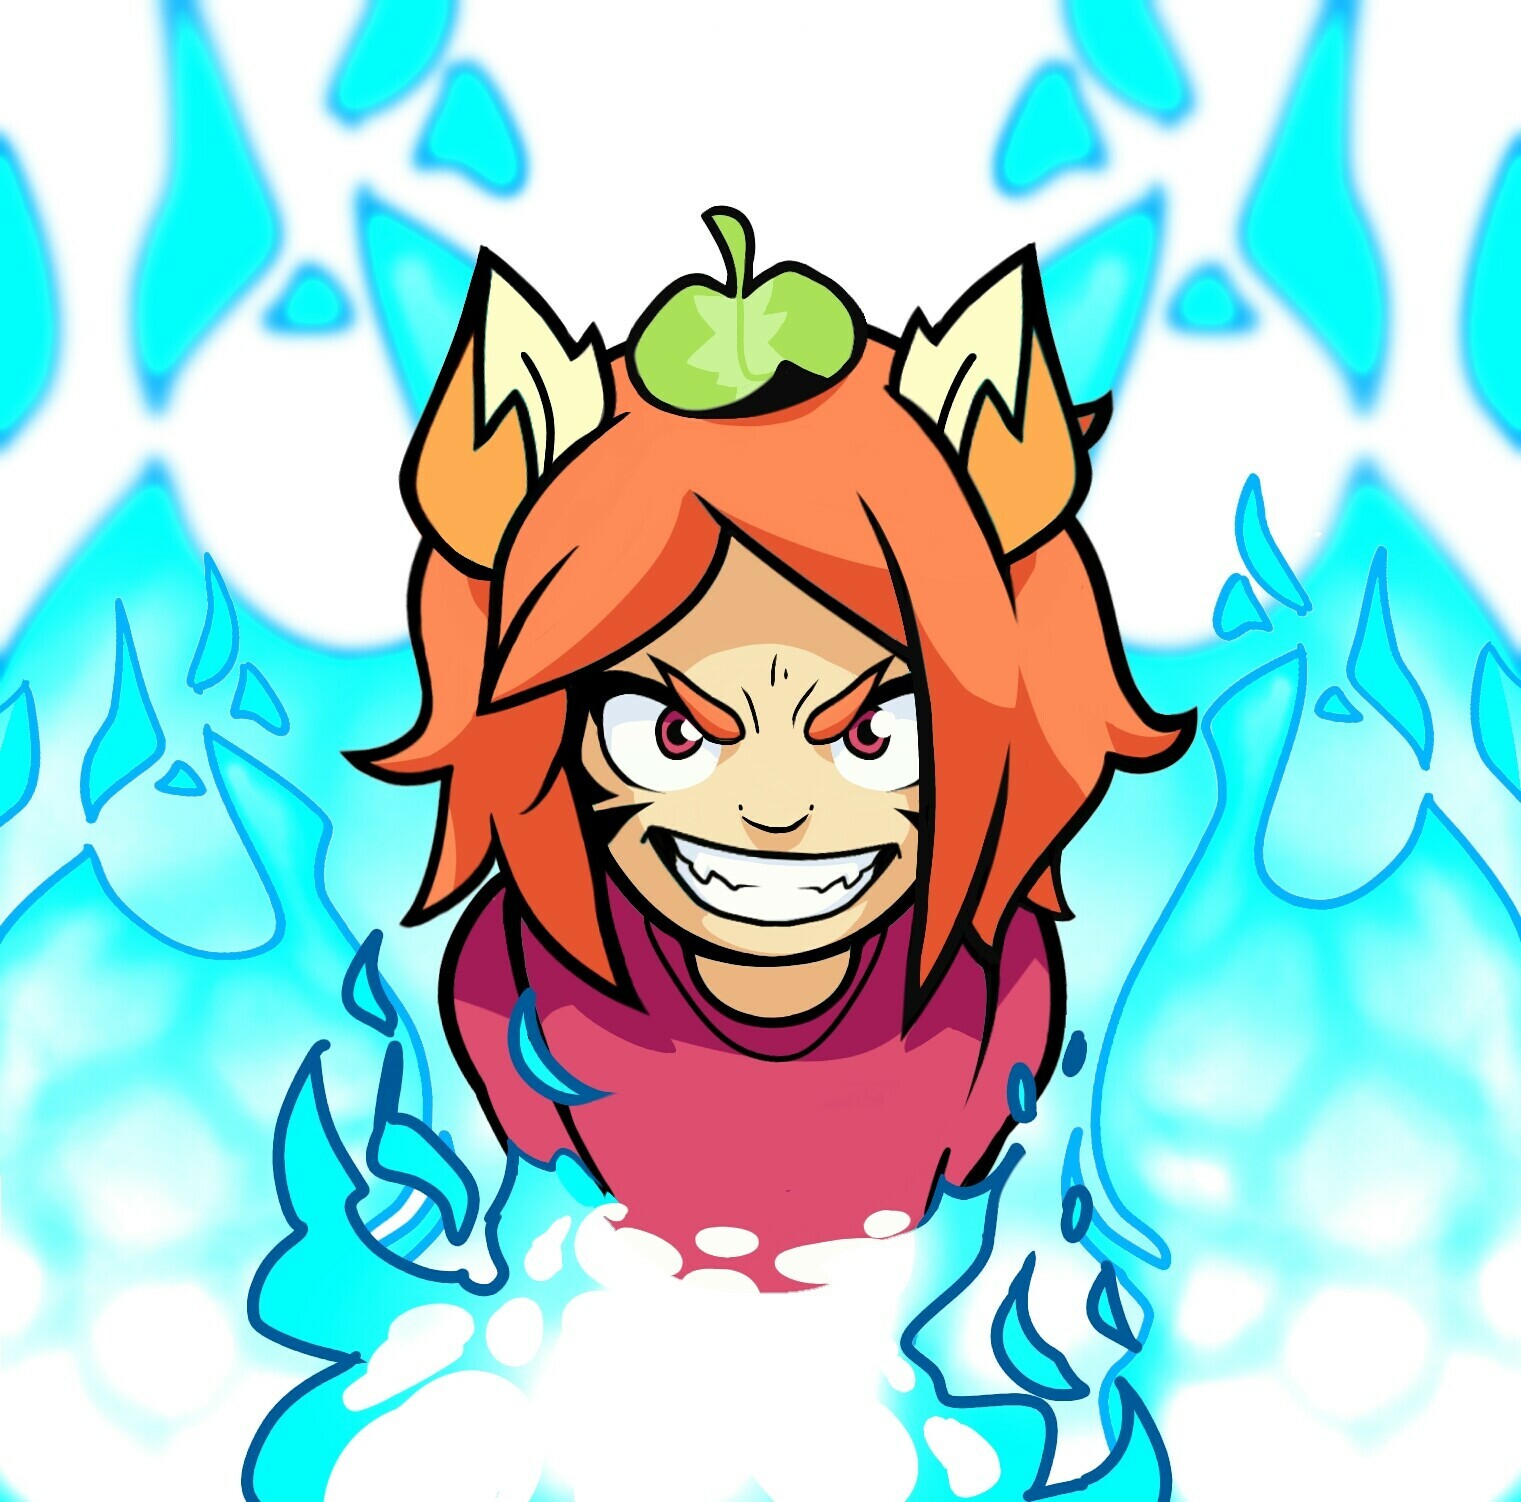 Angry Lil Yumiko 🔥 🔥 🔥 Requested by @dankuigi (Twitter) .